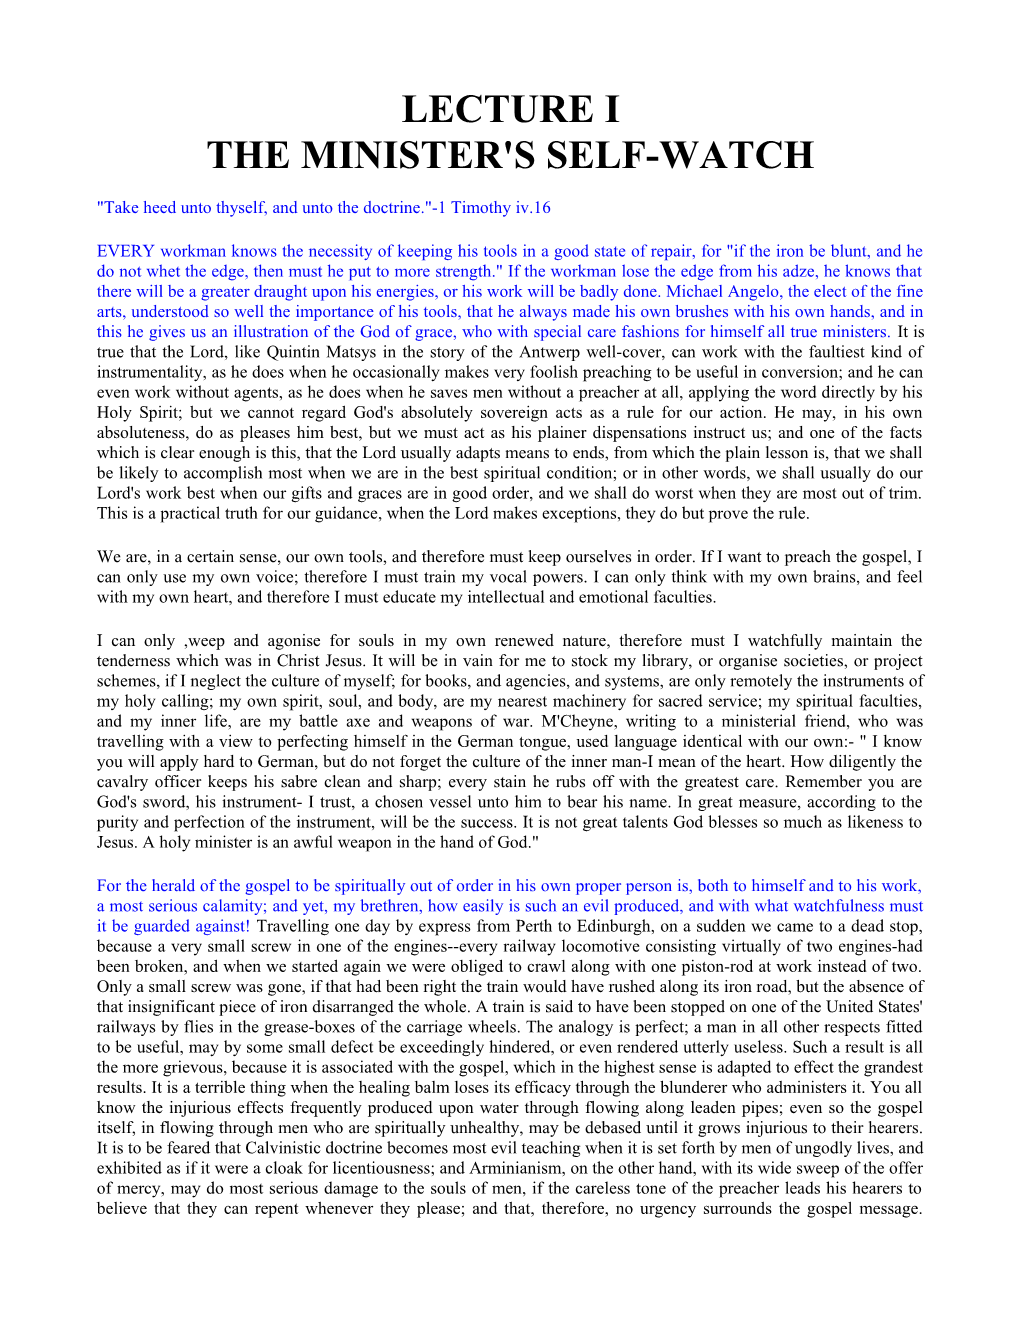 The Minister's Self-Watch